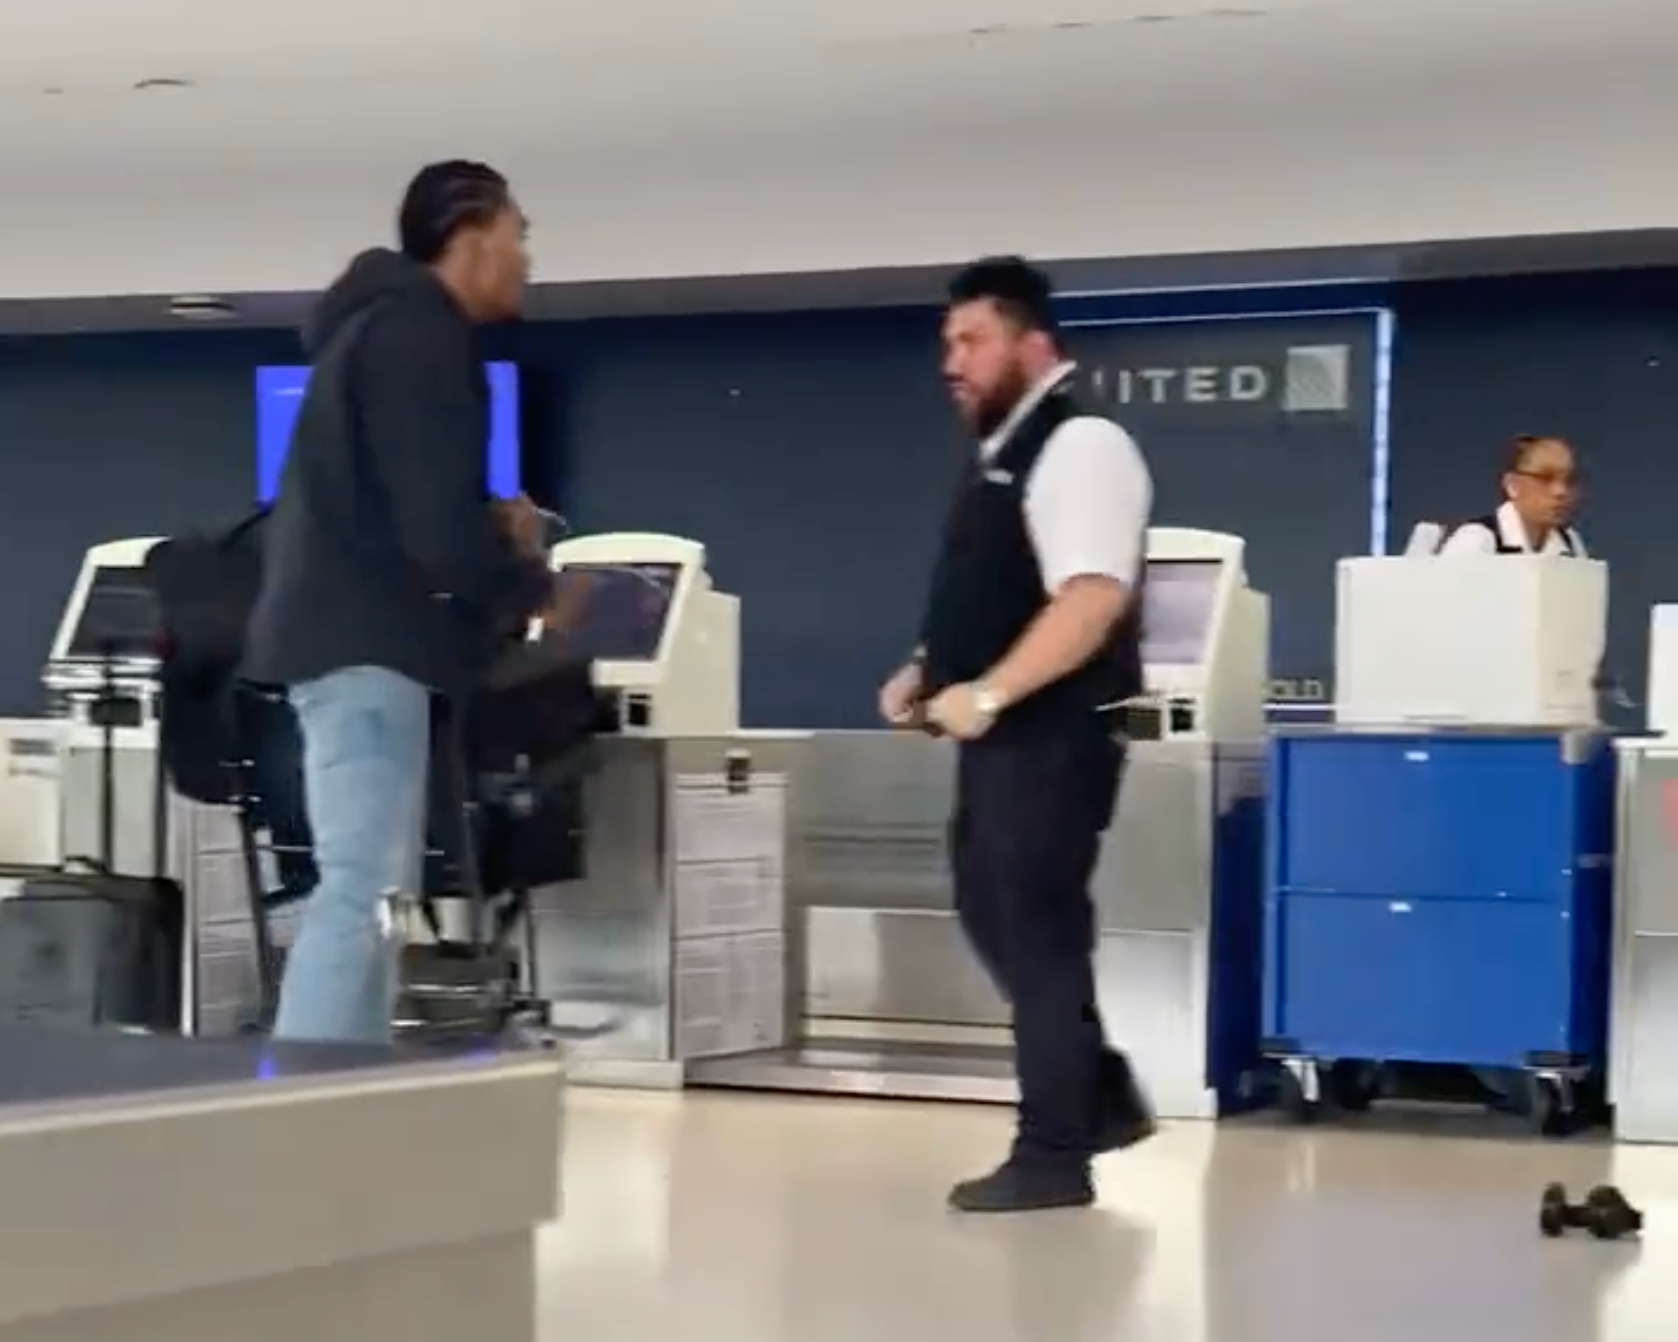 A viral video shows a United Airlines employee in a fistfight with former NFL player Brendan Langley